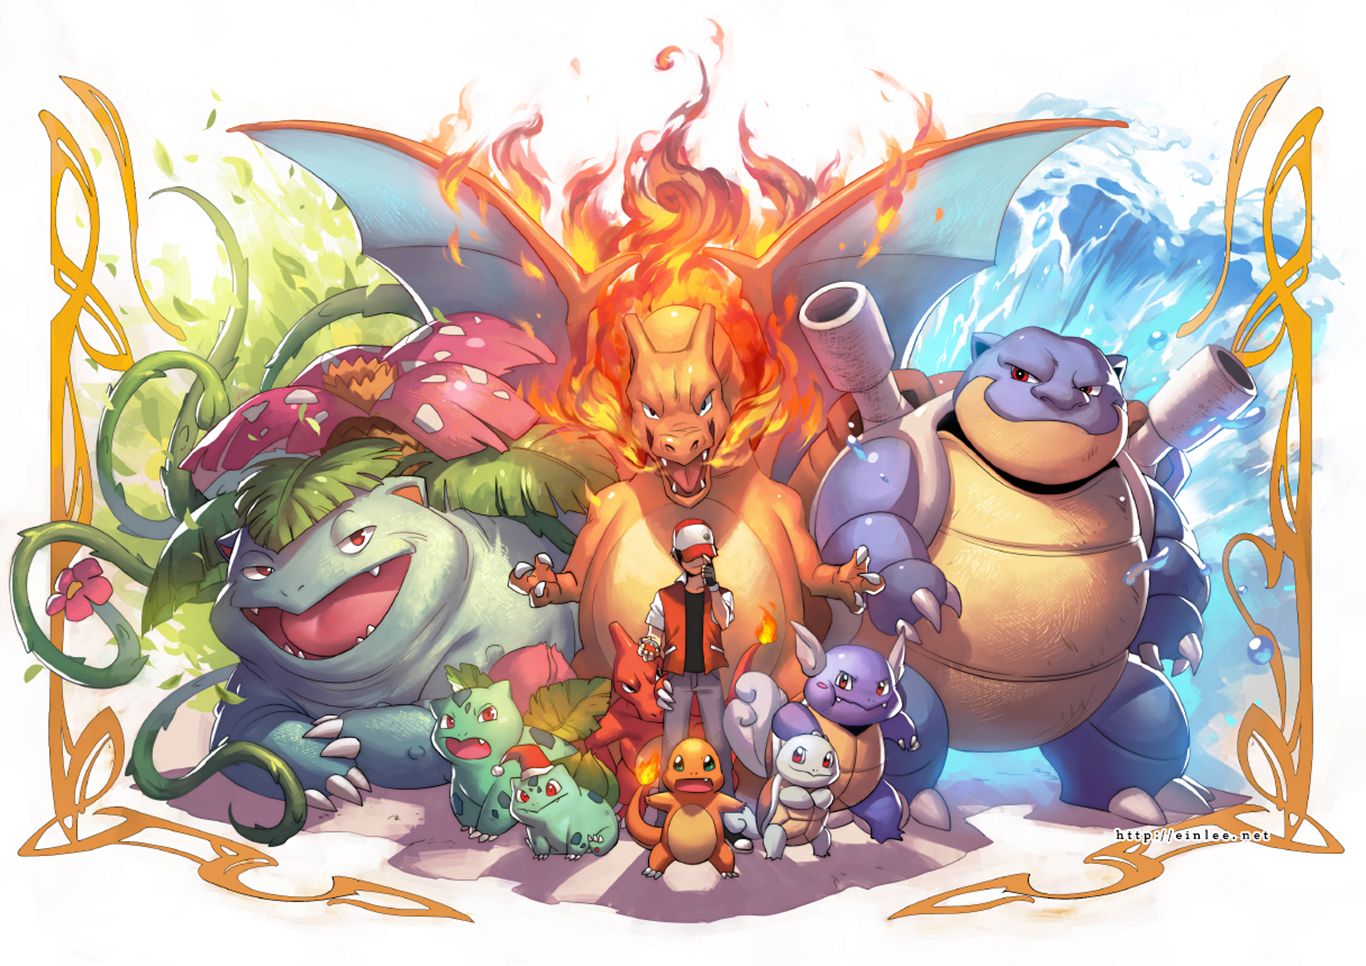 Cool Pokemon Wallpapers | Wallpapers, Backgrounds, Images, Art Photos.